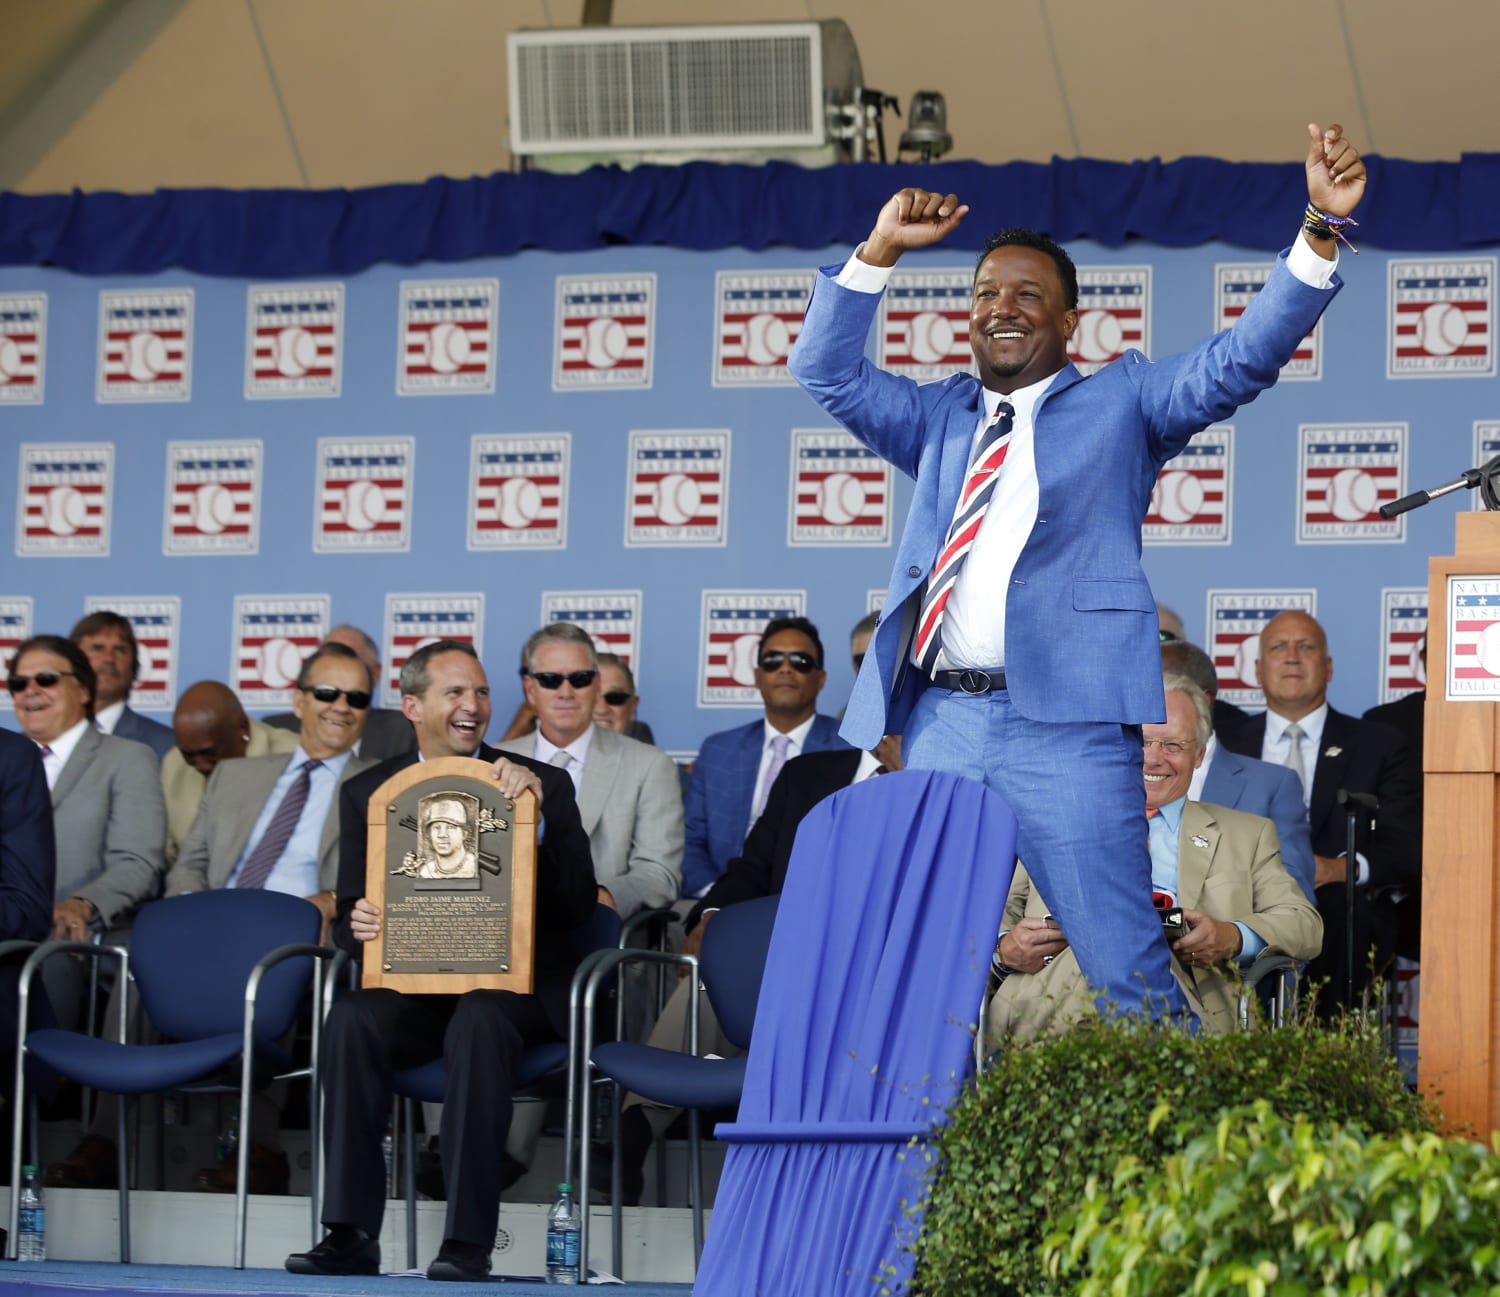 From the archives: New Hall of Famer Pedro Martinez - Mangin